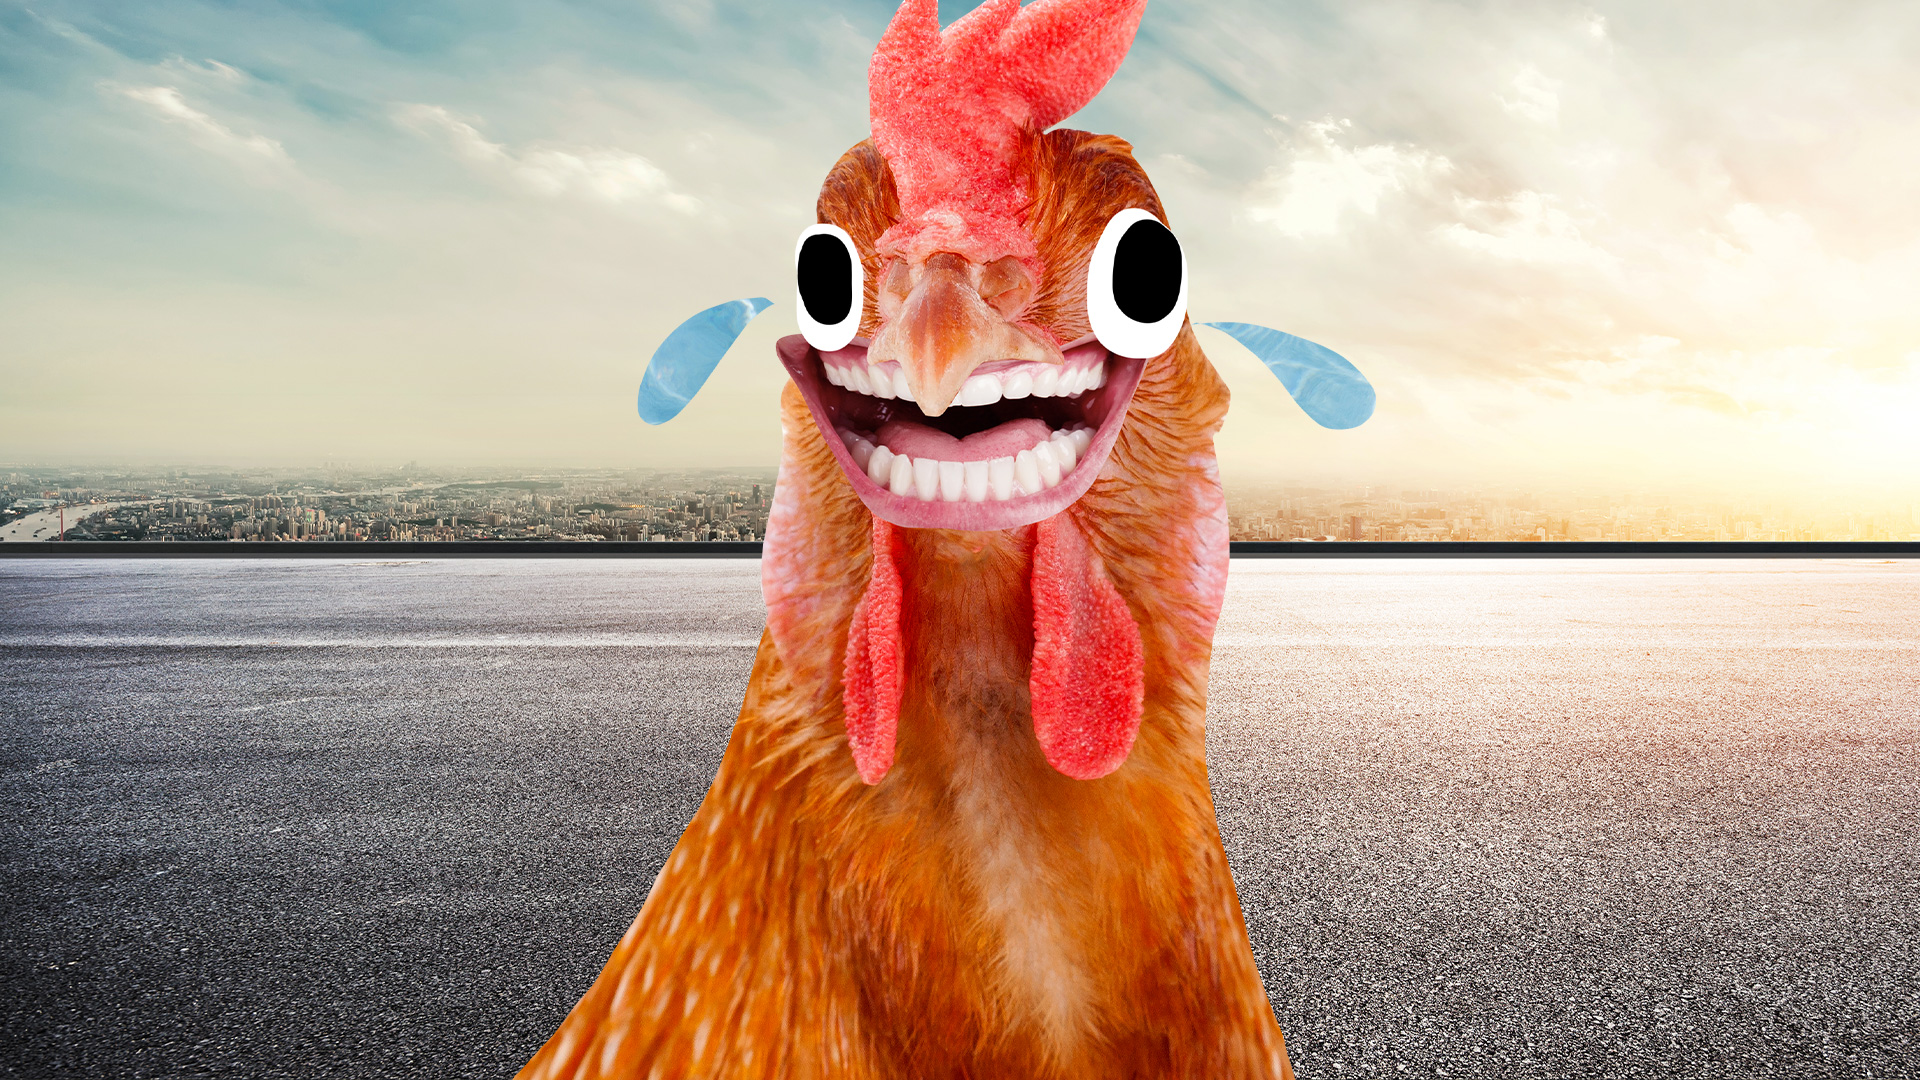 A chicken crossing the road